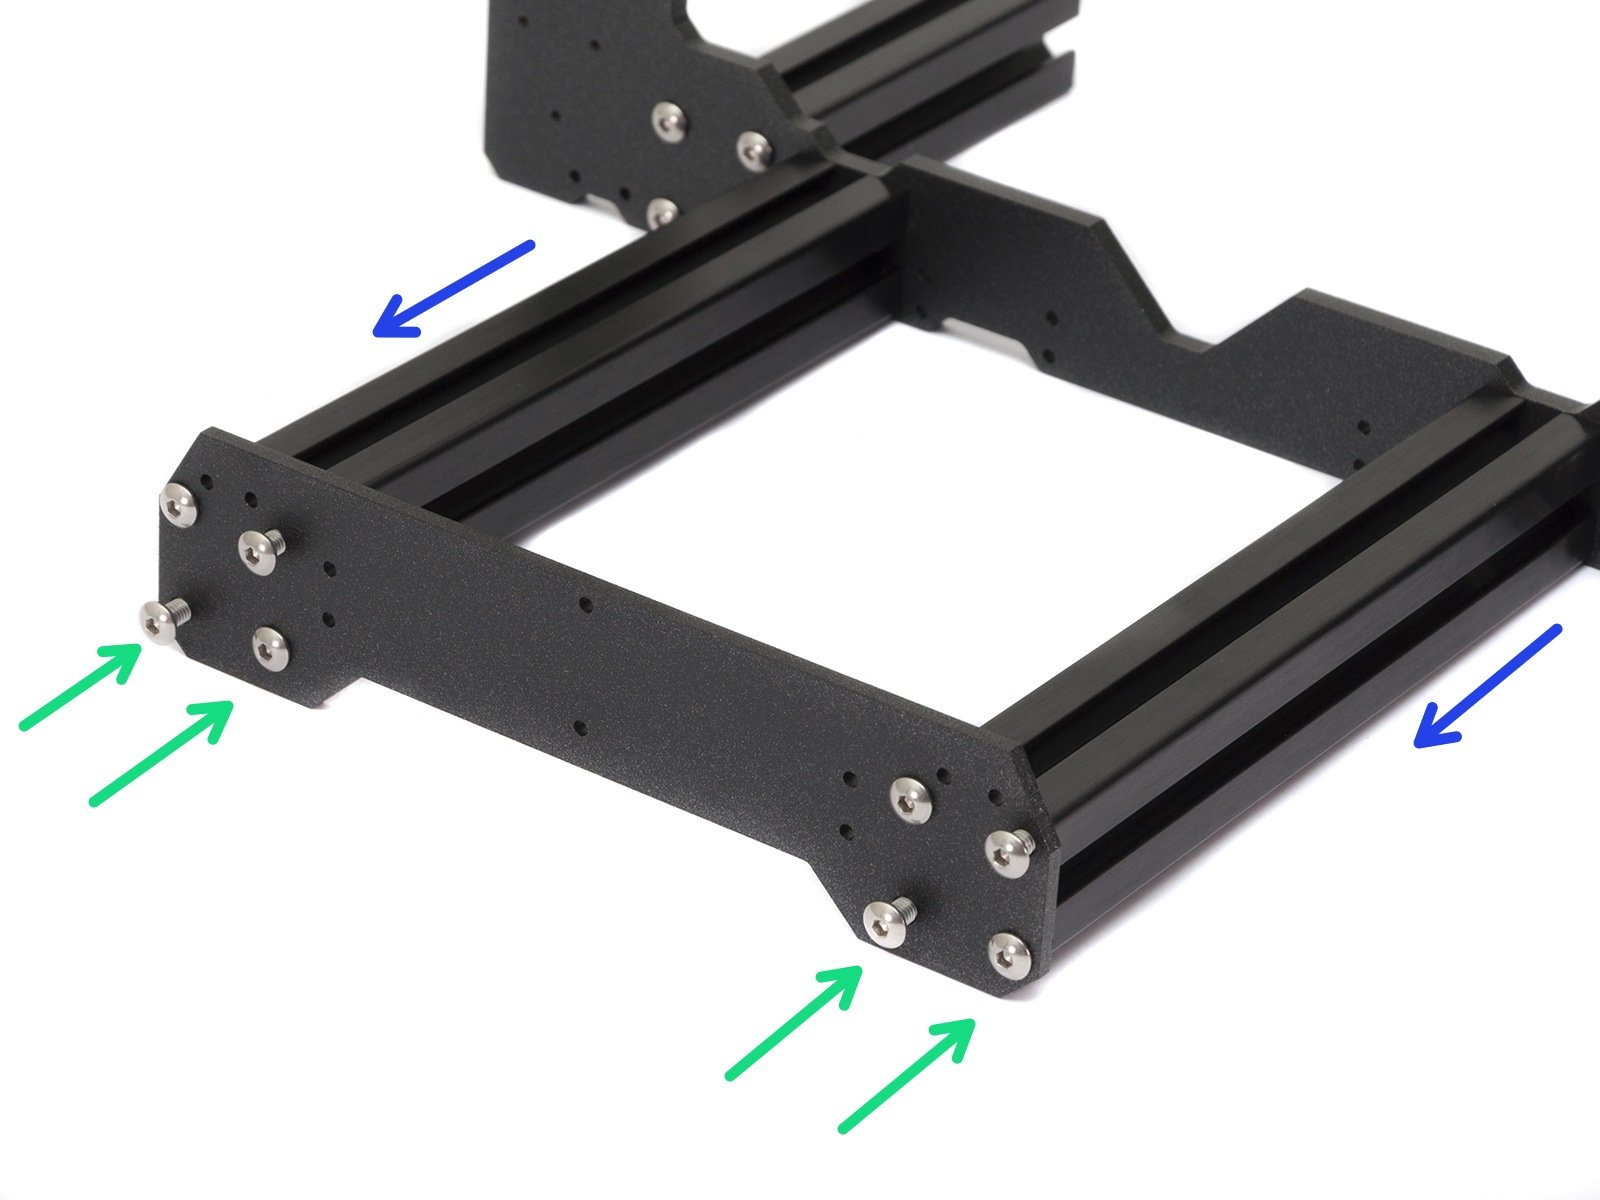 Y-axis: front plate assembly